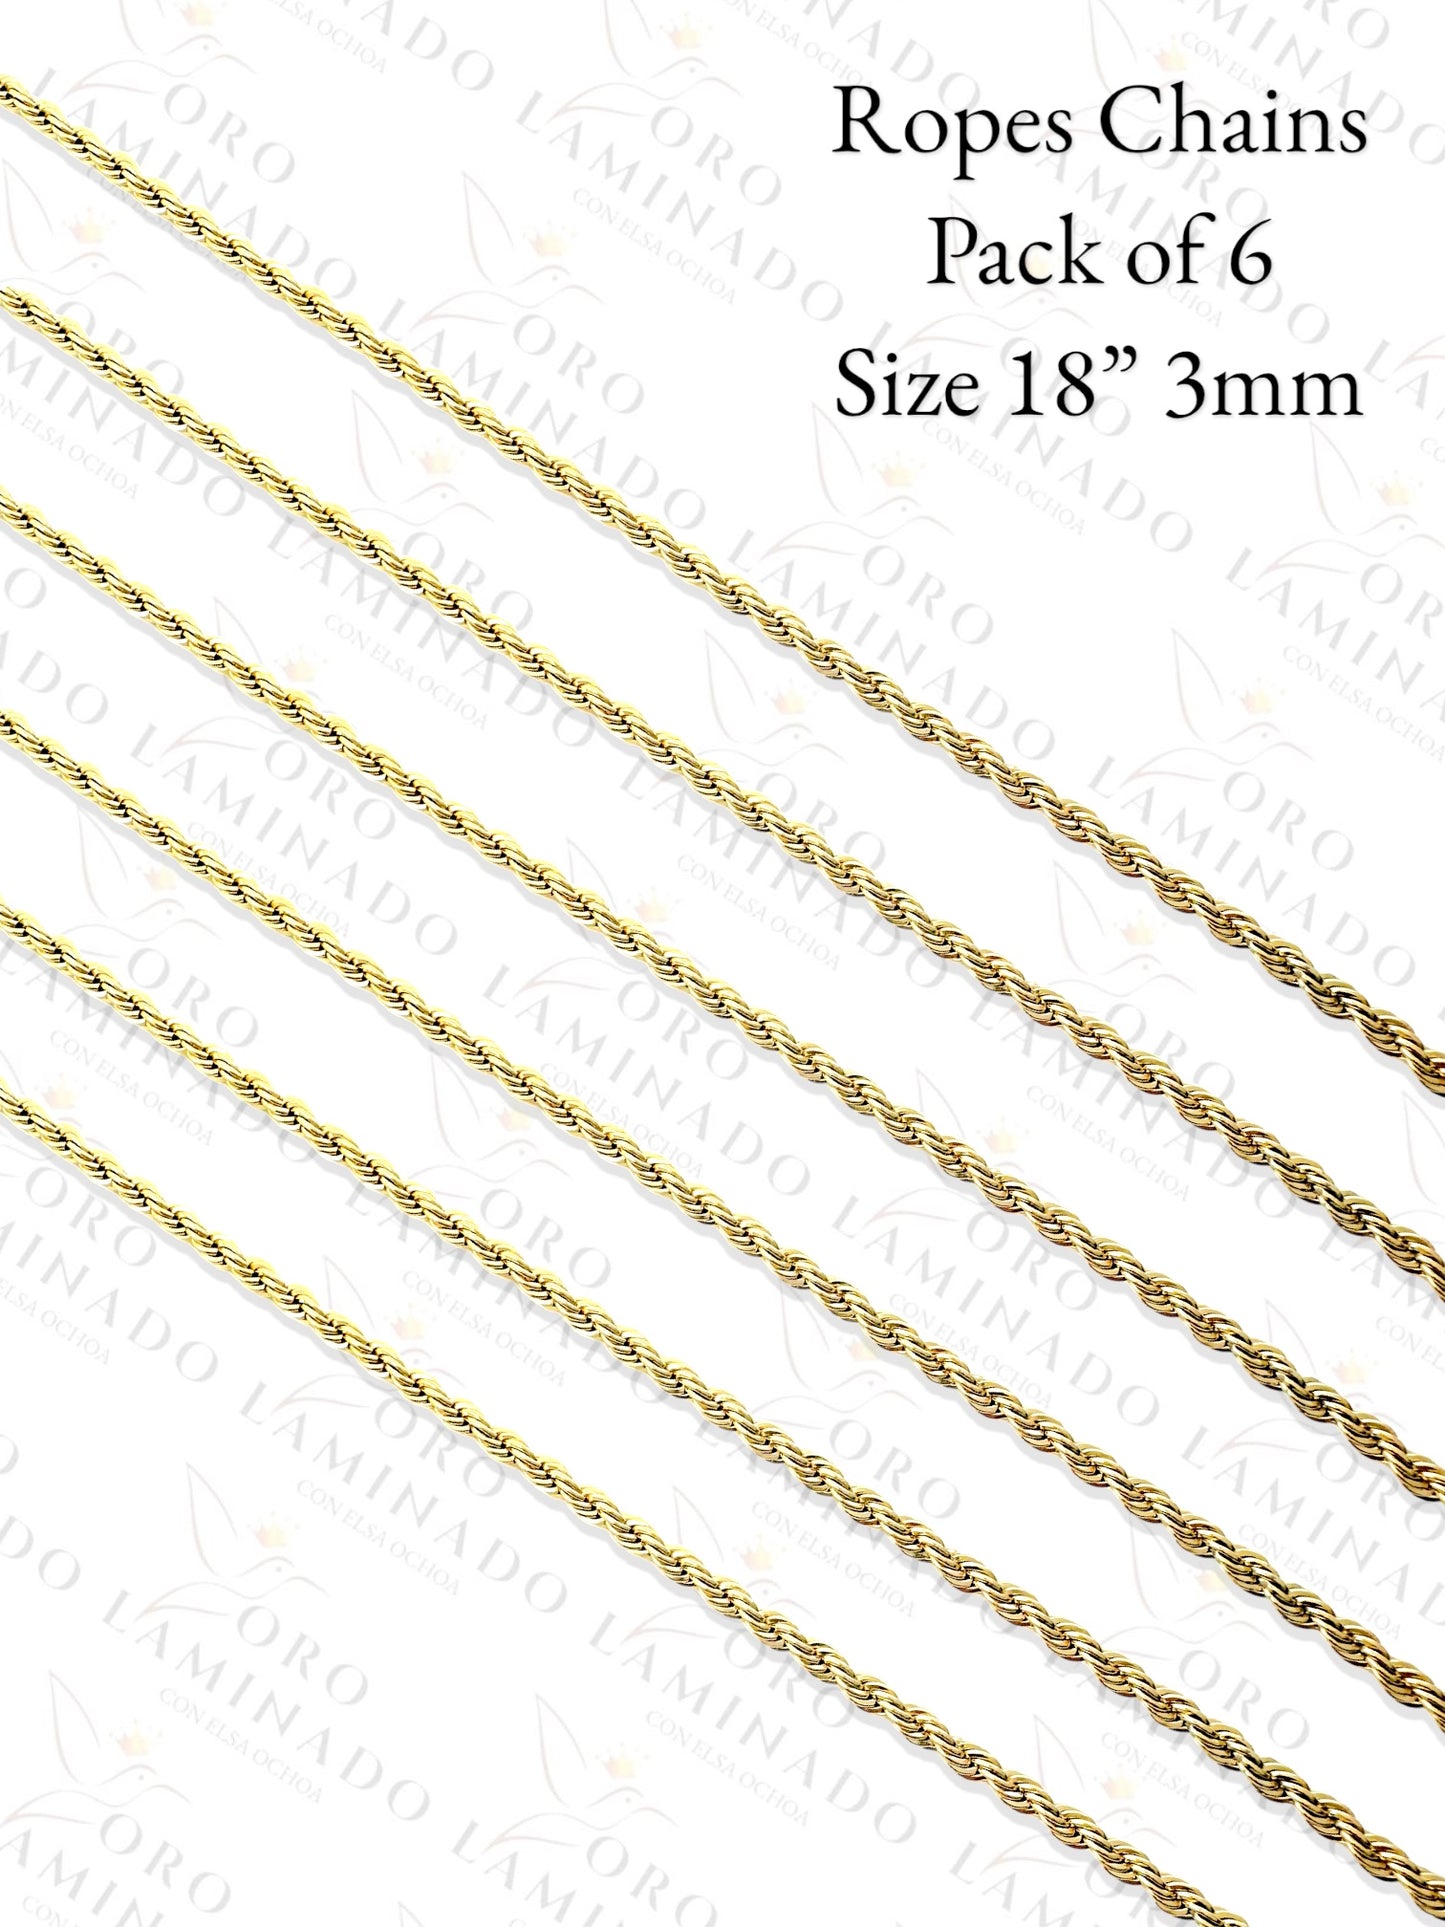 High Quality Rope Chains Pack of 6 Size 18" 3mm B132